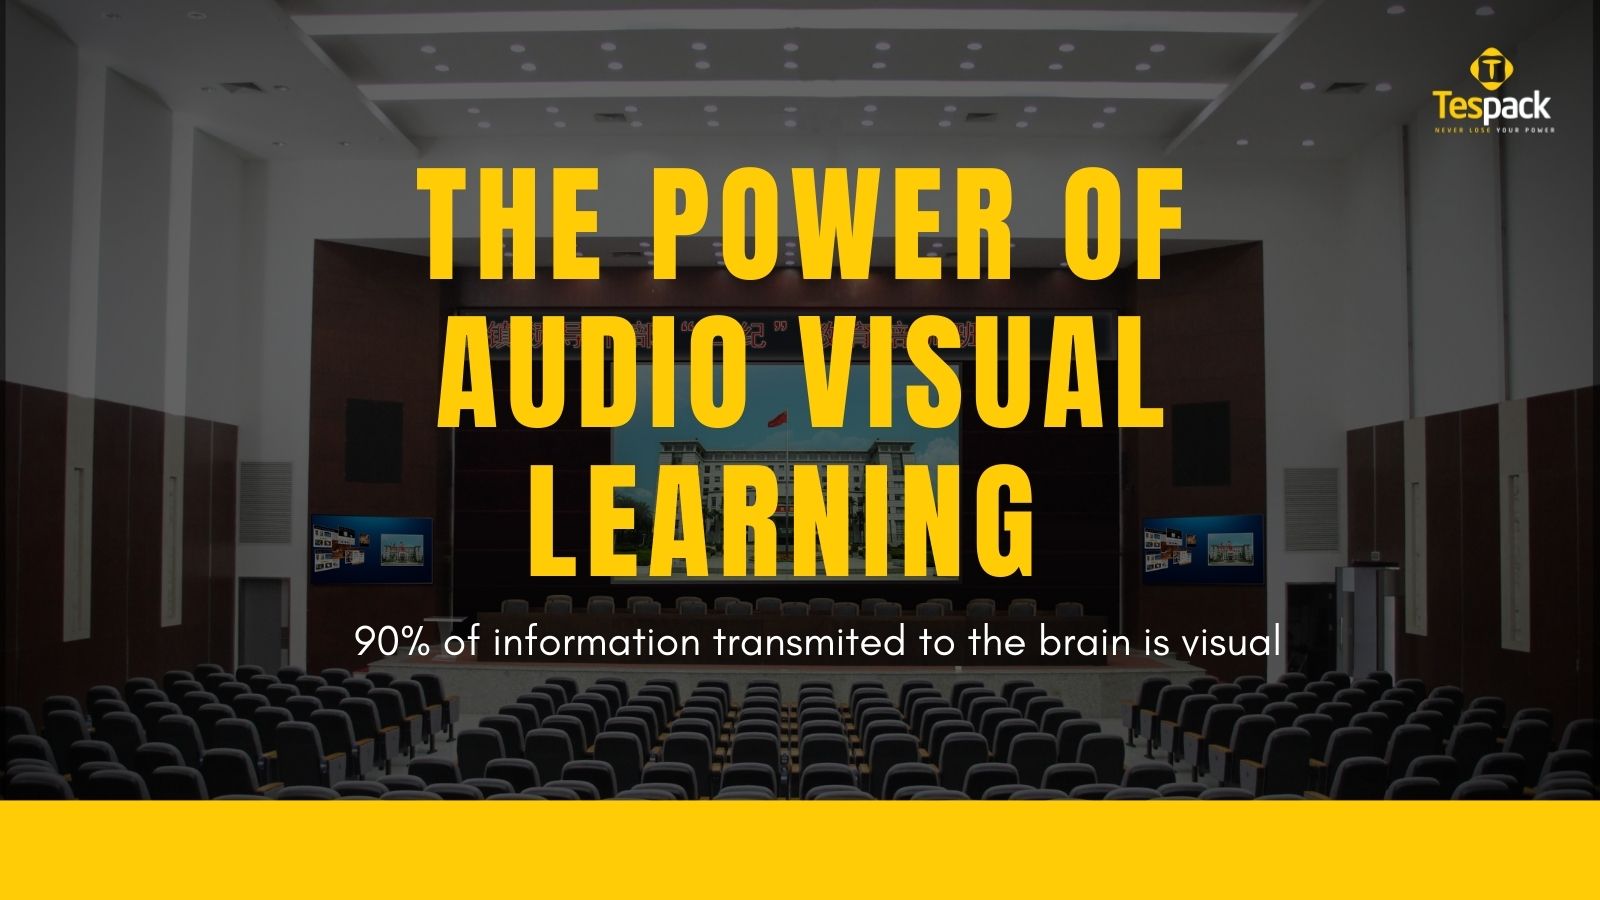 The power of audiovisual learning